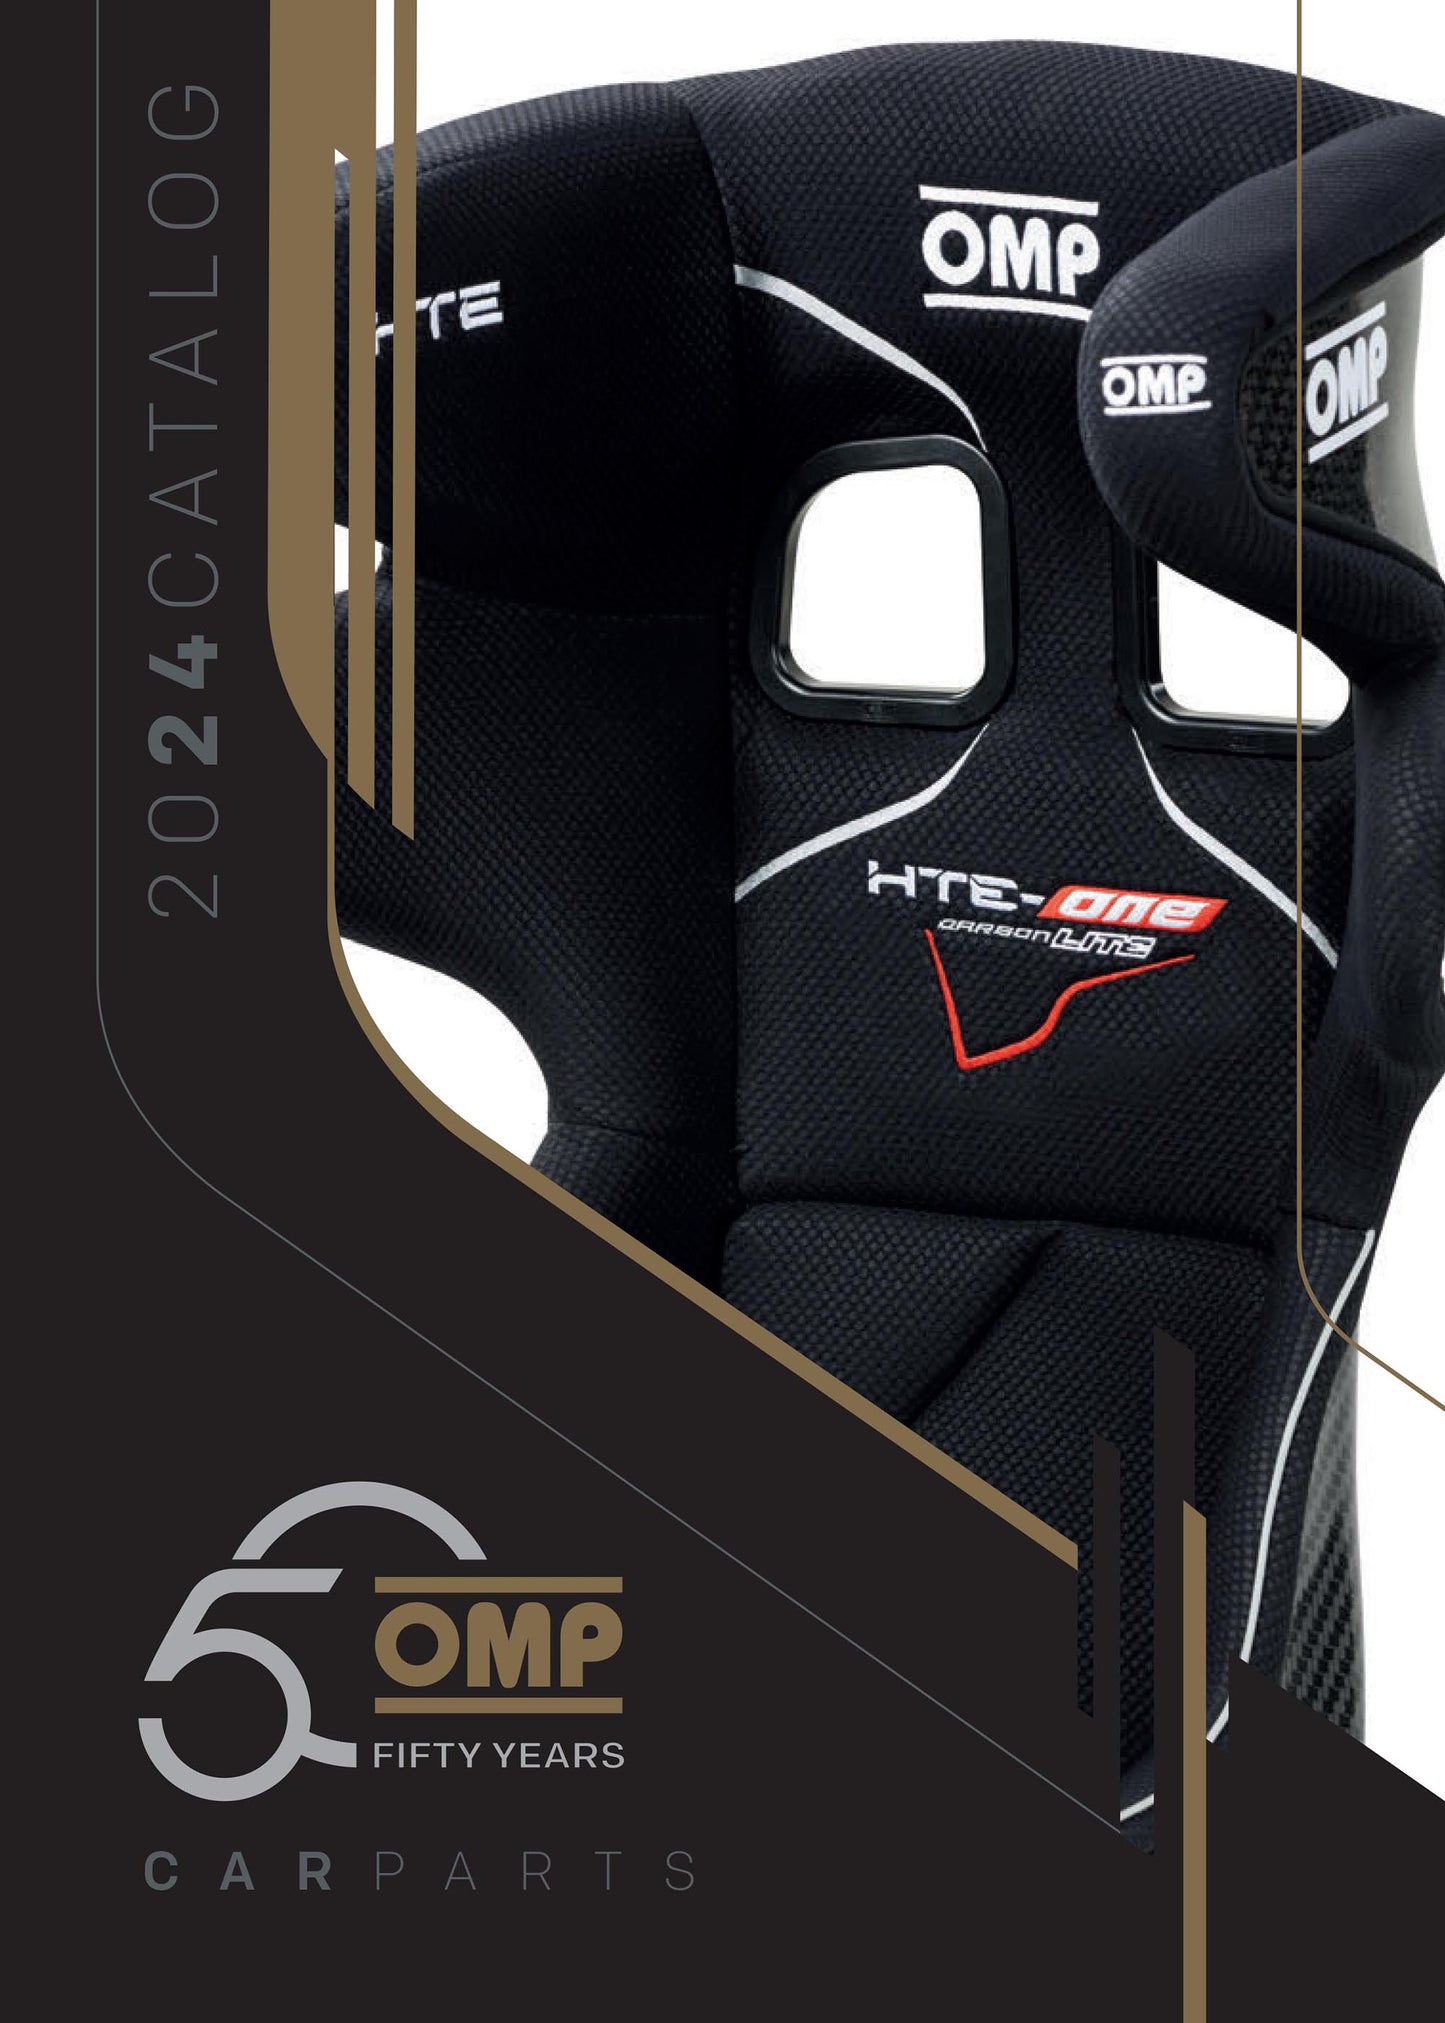 OMP Racing Bucket Seat TRS-X Entry Level Race Rally FIA 8855-1999 Approved